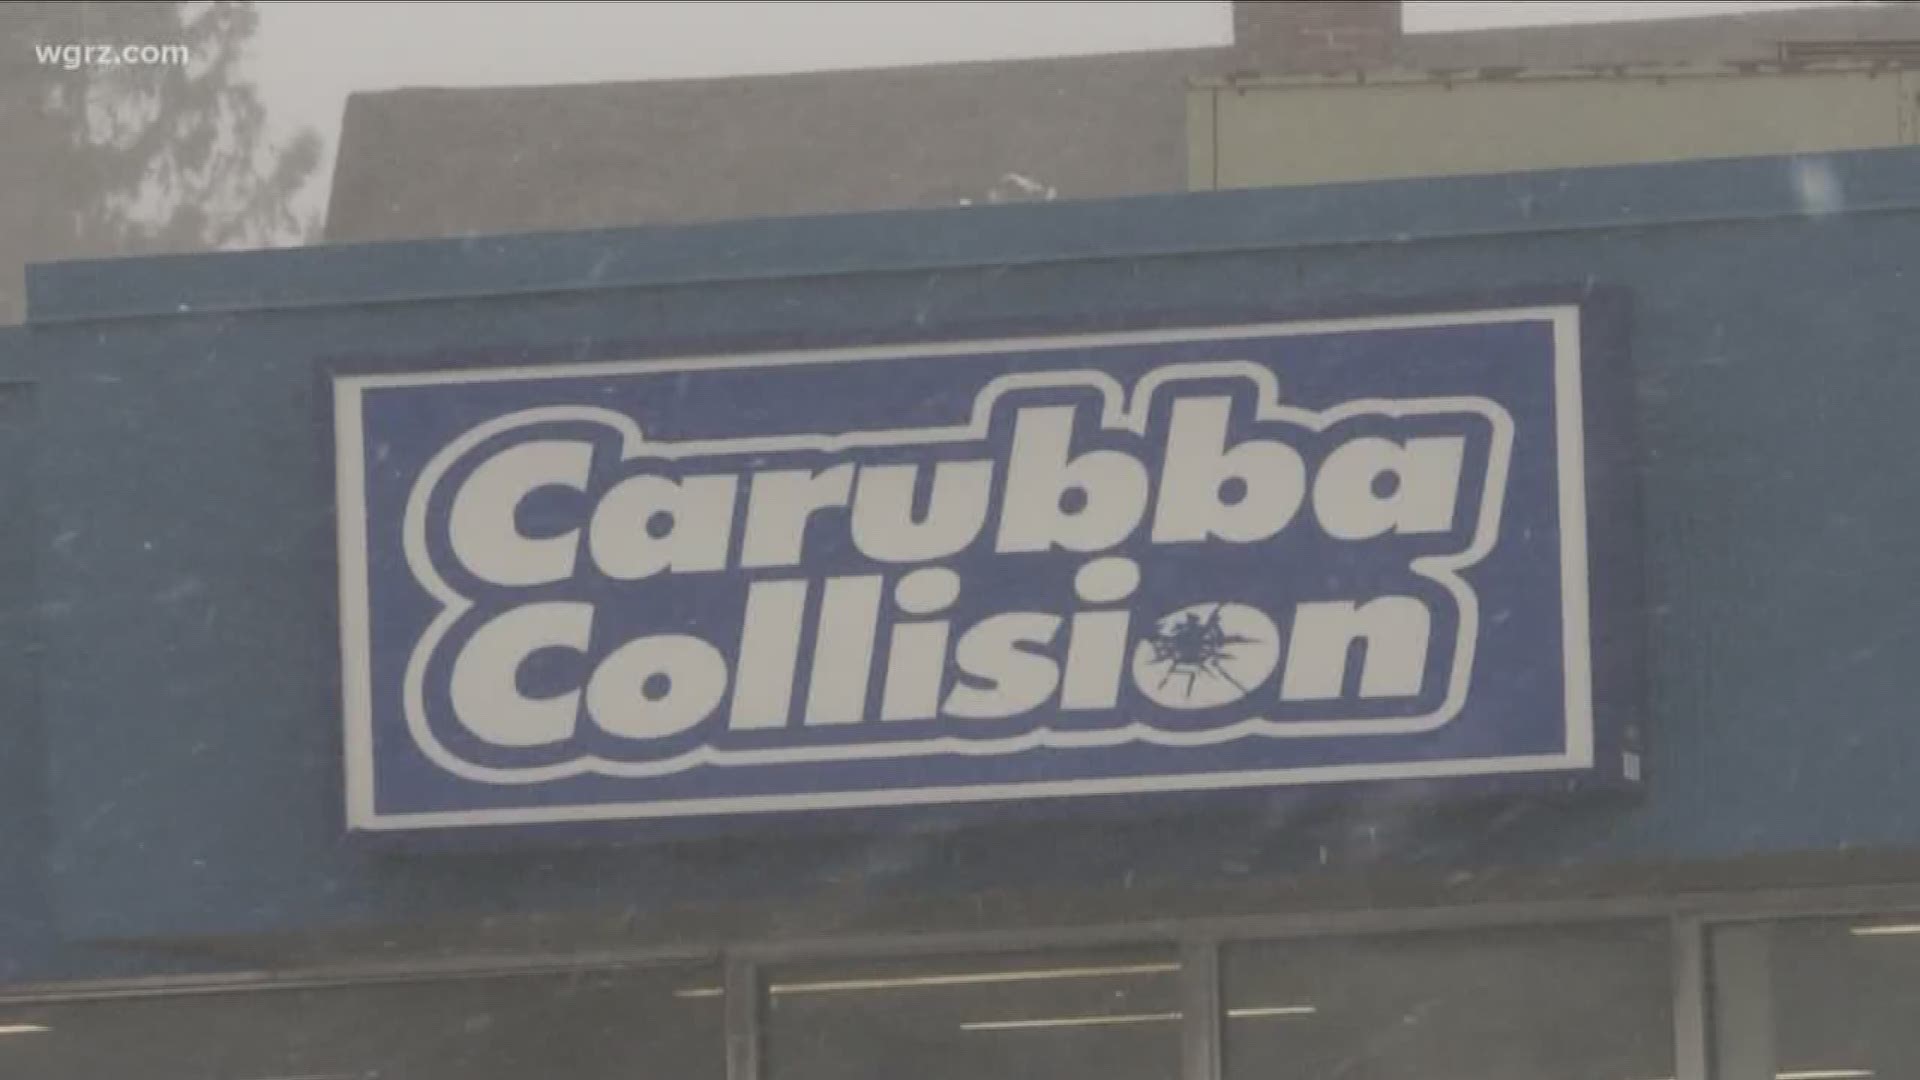 report the family-owned company has acquired by "Gerber Collision and Glass."